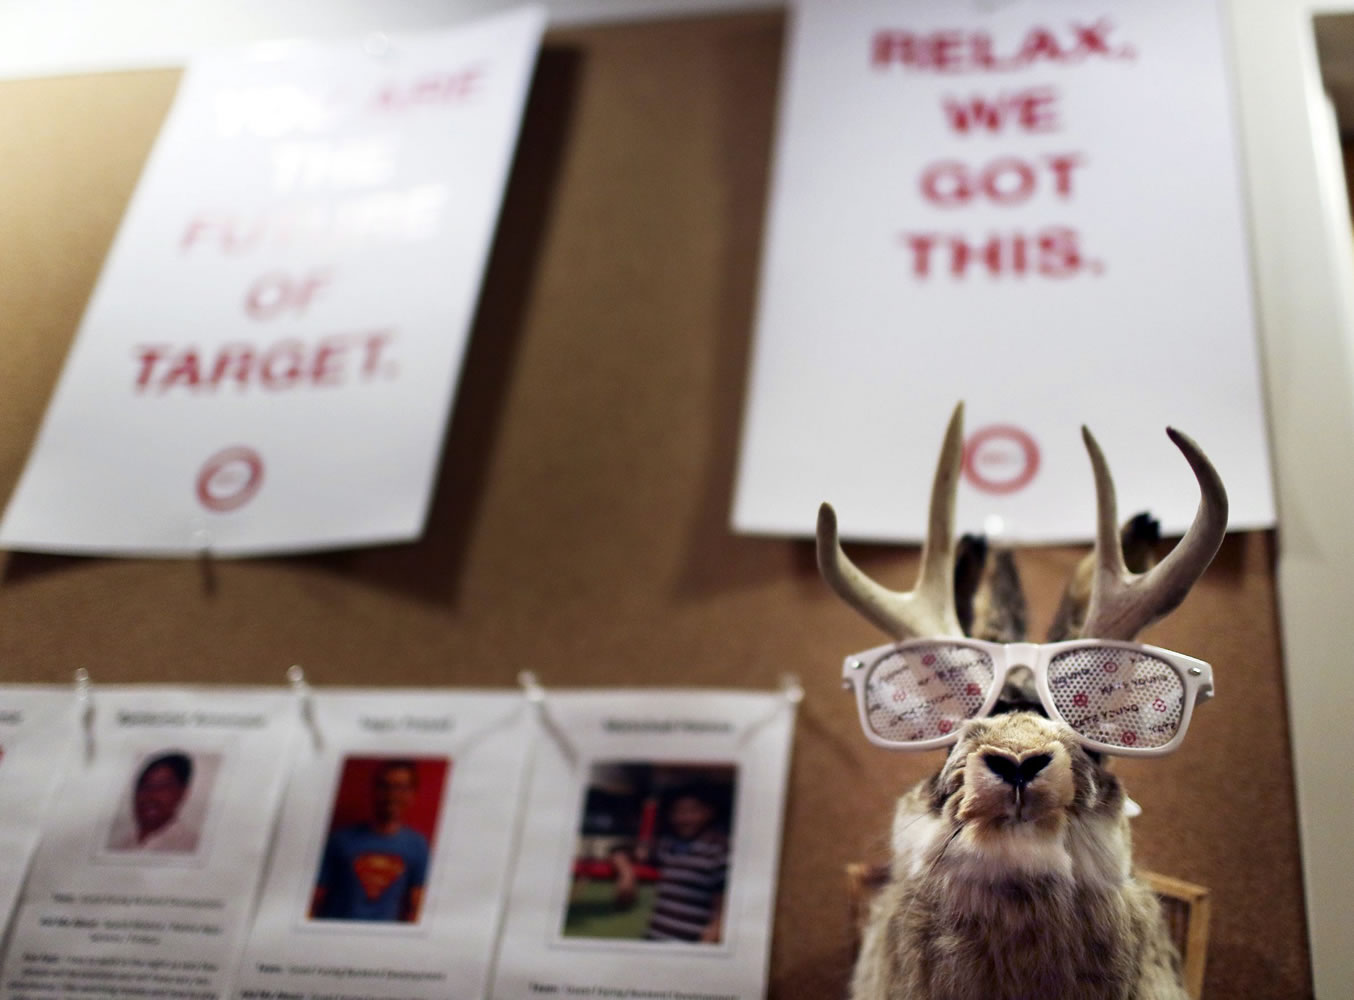 Sunglasses adorn a jackalope mounted near the entrance of Target's new tech research and development facility in Minneapolis, Minnesota. The company is trying to foster a culture of innovation to keep up with rapidly changing technology. Contests reward employees for submitting new ideas.